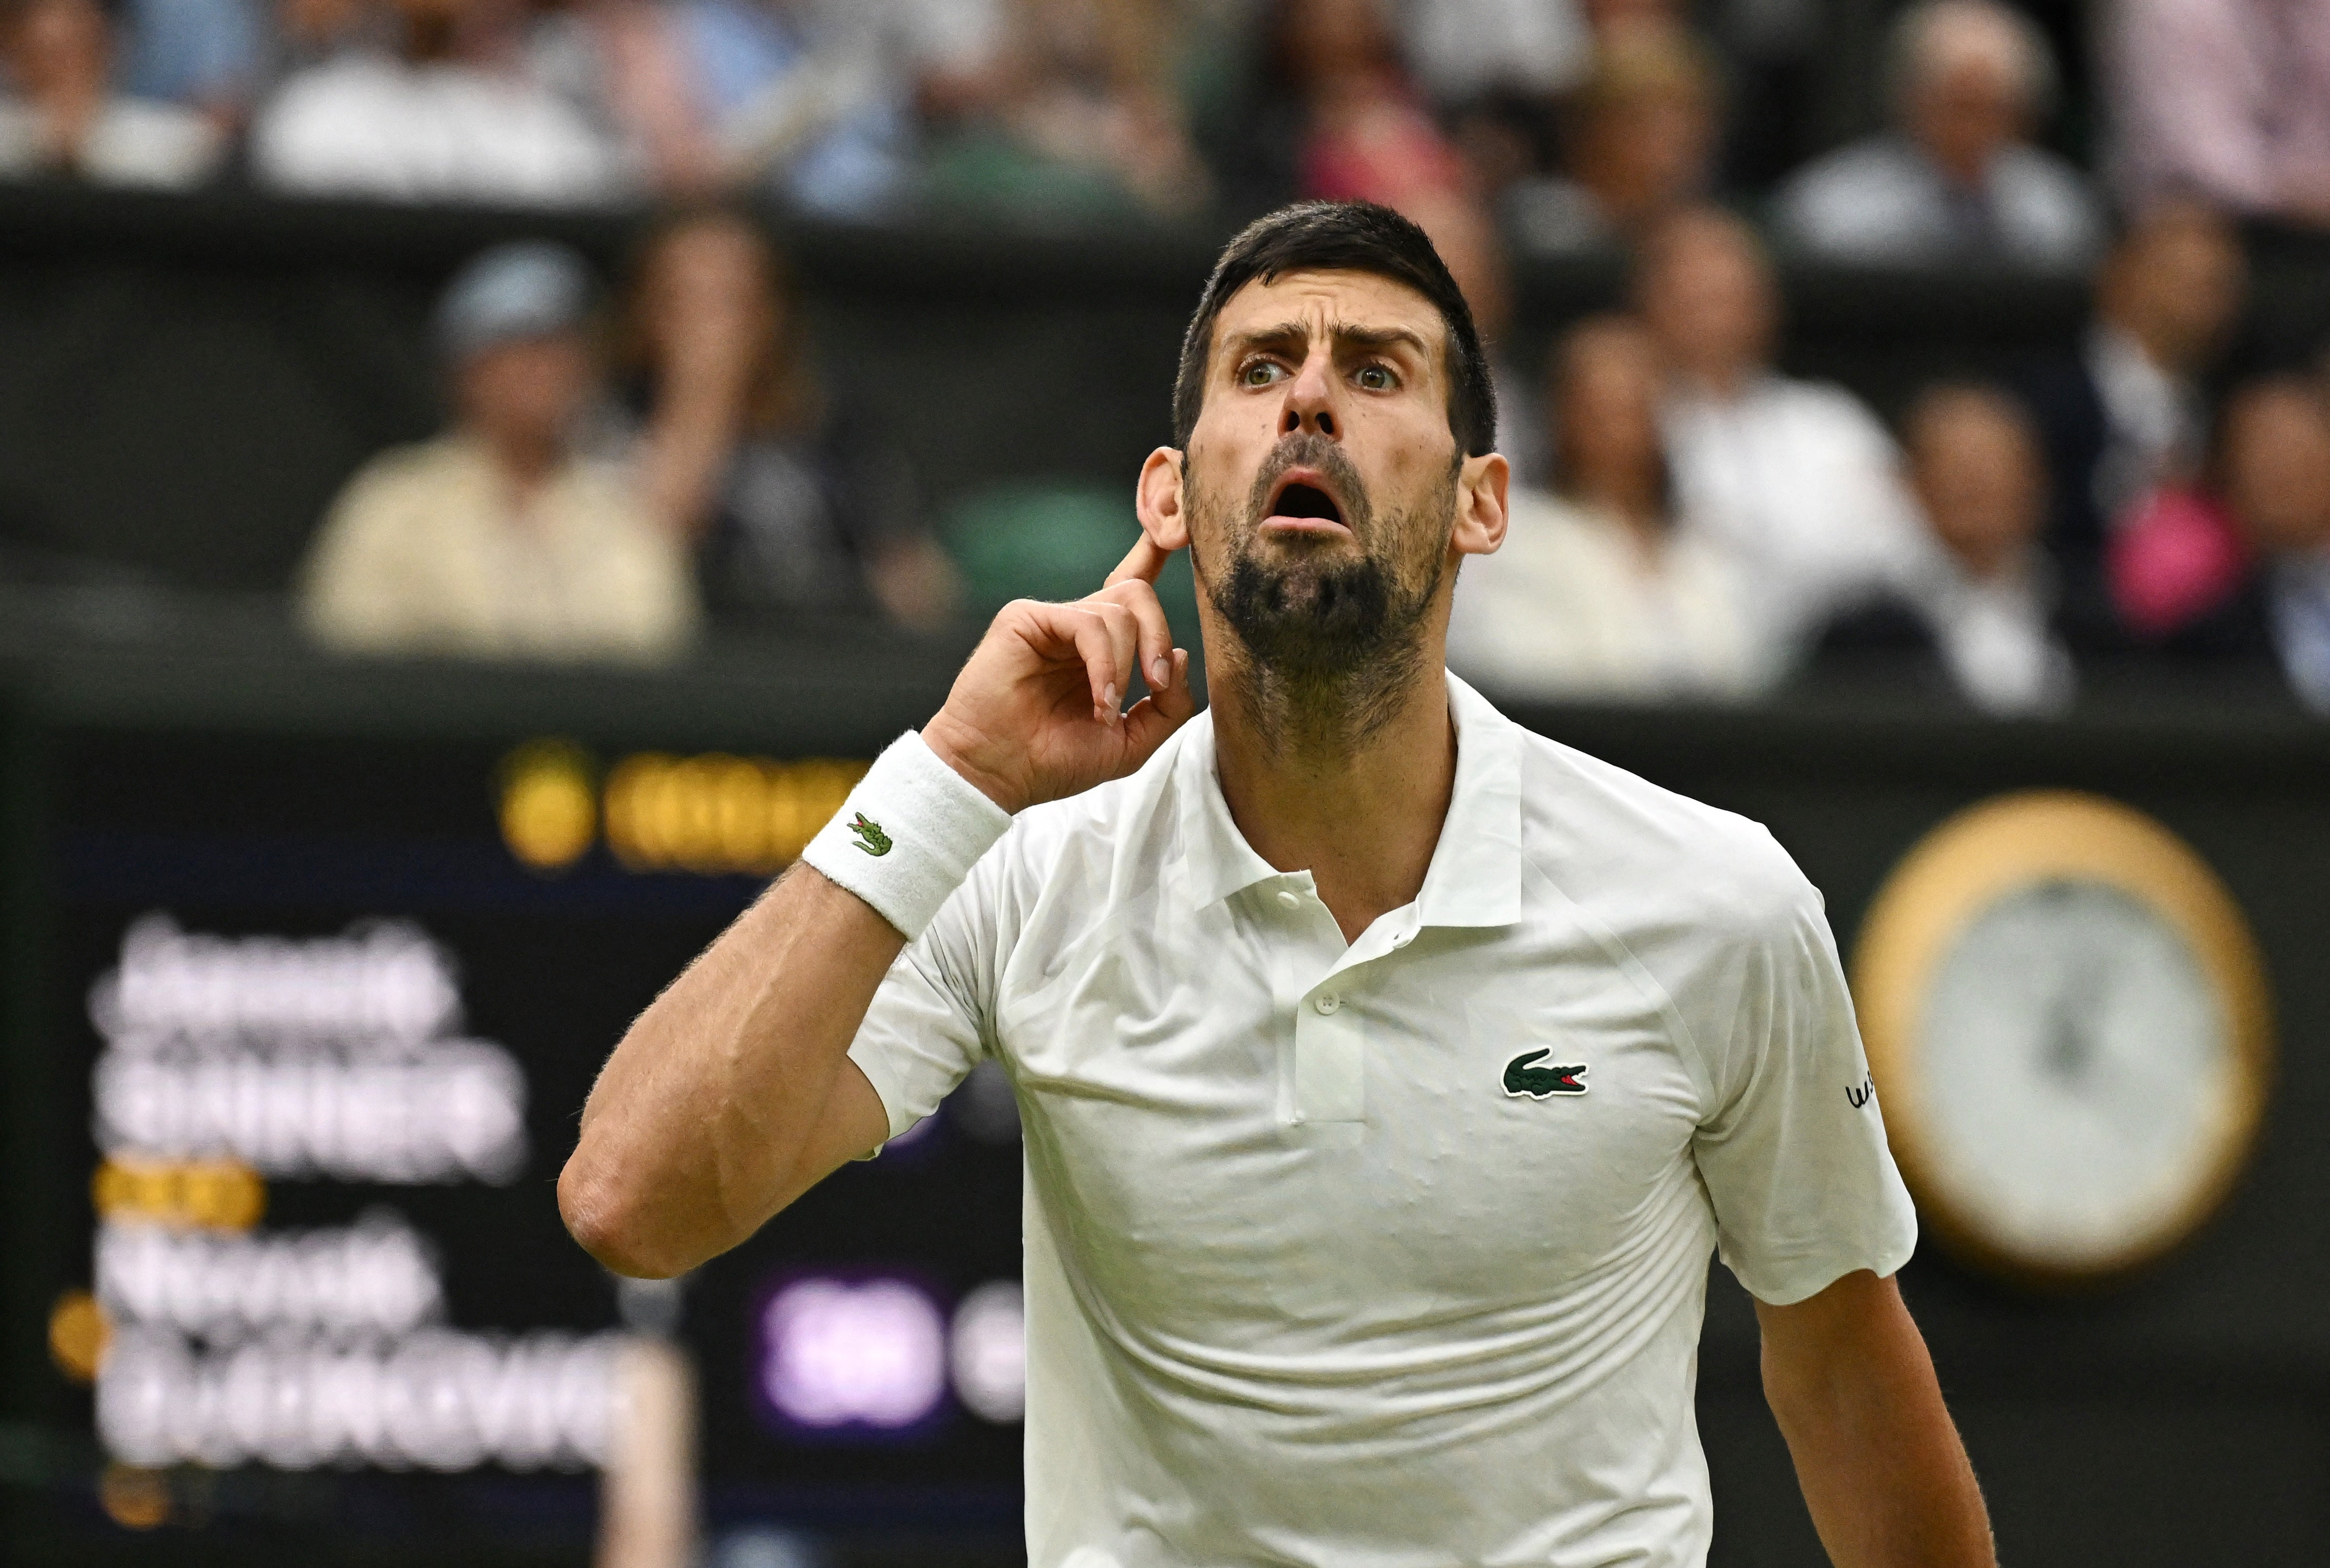 Djokovic taunts Centre Court after saving two set points against Sinner